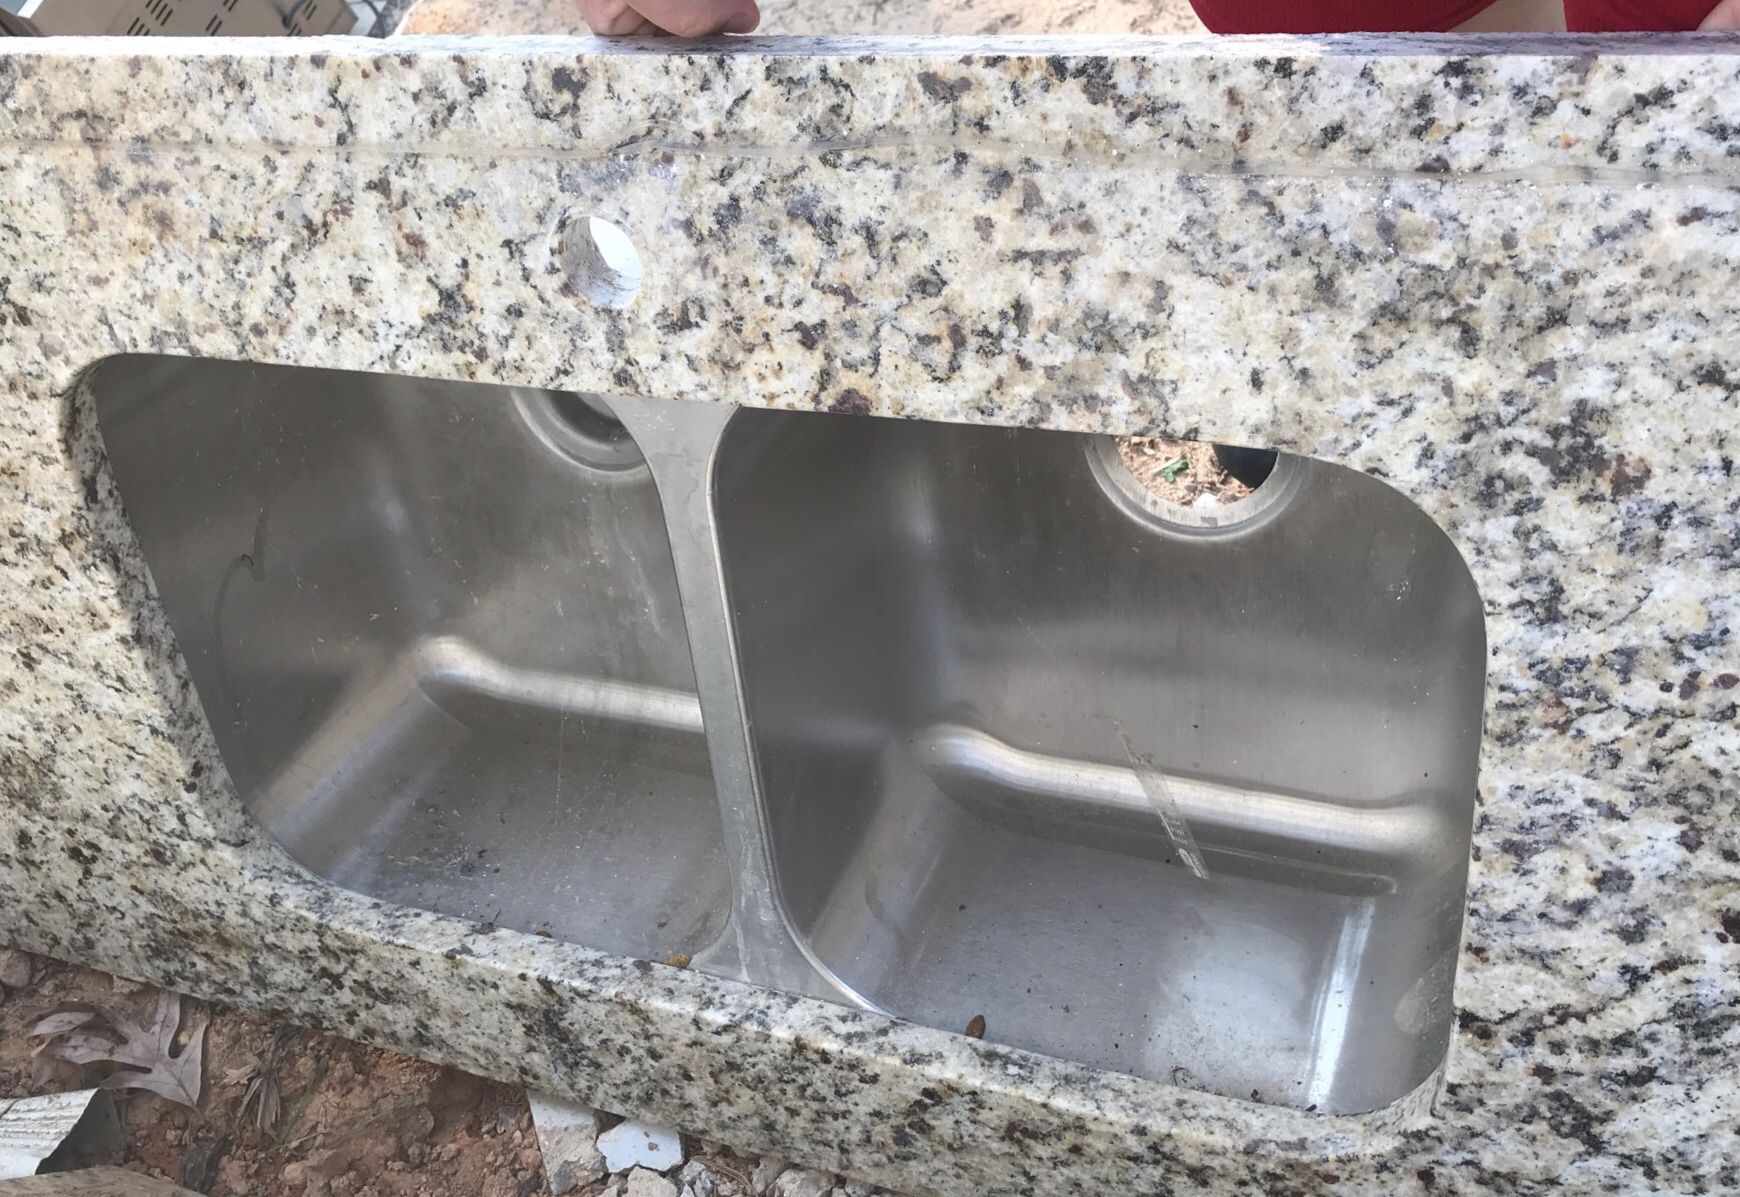 Beautiful Granite countertop with double sink